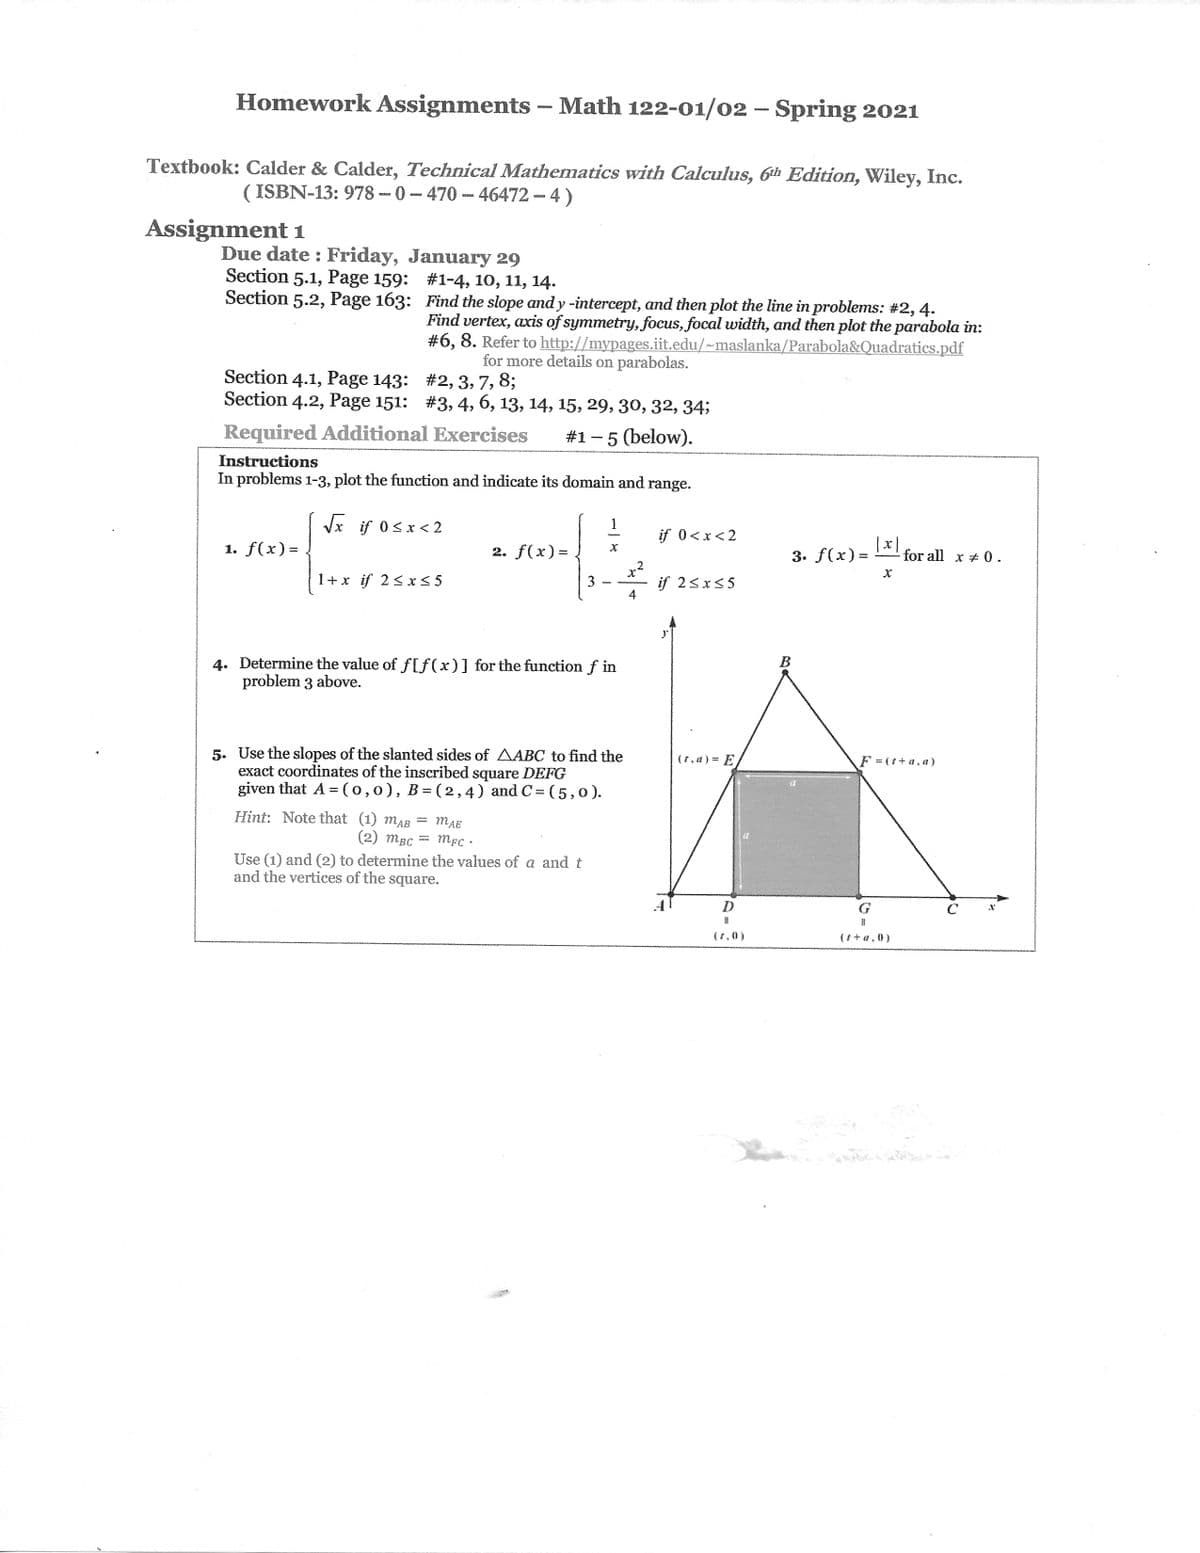 Homework Assignments – Math 122-01/02 – Spring 2021
Textbook: Calder & Calder, Technical Mathematics with Calculus, Gth Edition, Wiley, Inc.
( ISBN-13: 978 -- 0 – 470 – 46472 - 4)
Assignment 1
Due date : Friday, January 29
Section 5.1, Page 159: #1-4, 10, 11, 14.
Section 5.2, Page 163: Find the slope and y -intercept, and then plot the line in problems: #2,4.
Find vertex, axis of symmetry, focus, focal width, and then plot the parabola in:
#6, 8. Refer to http://mypages.iit.edu/~maslanka/Parabola&Quadratics.pdf
for more details on parabolas.
Section 4.1, Page 143: #2, 3, 7, 8;
Section 4.2, Page 151: #3, 4, 6, 13, 14, 15, 29, 30, 32, 34;
Required Additional Exercises
#1 -5 (below).
Instructions
In problems 1-3, plot the function and indicate its domain and range.
Vx if 0<x<2
1
if 0<x<2
1. f(x)= .
2. f(x)=
3. f(x)=
-for all x 0.
2
1+x if 2< x< 5
3
if 2<x<5
4. Determine the value of f[f(x)] for the function f in
problem 3 above.
В
5. Use the slopes of the slanted sides of AABC to find the
exact coordinates of the inscribed square DEFG
given that A =(0,0), B=(2,4) and C= (5,0).
(t,a) = E
F = (t+ a, a)
Hint: Note that (1) mAB
(2) mBc
mAE
Use (1) and (2) to determine the values of a and t
and the vertices of the square.
D
G
(t,0)
(i +a,0)
